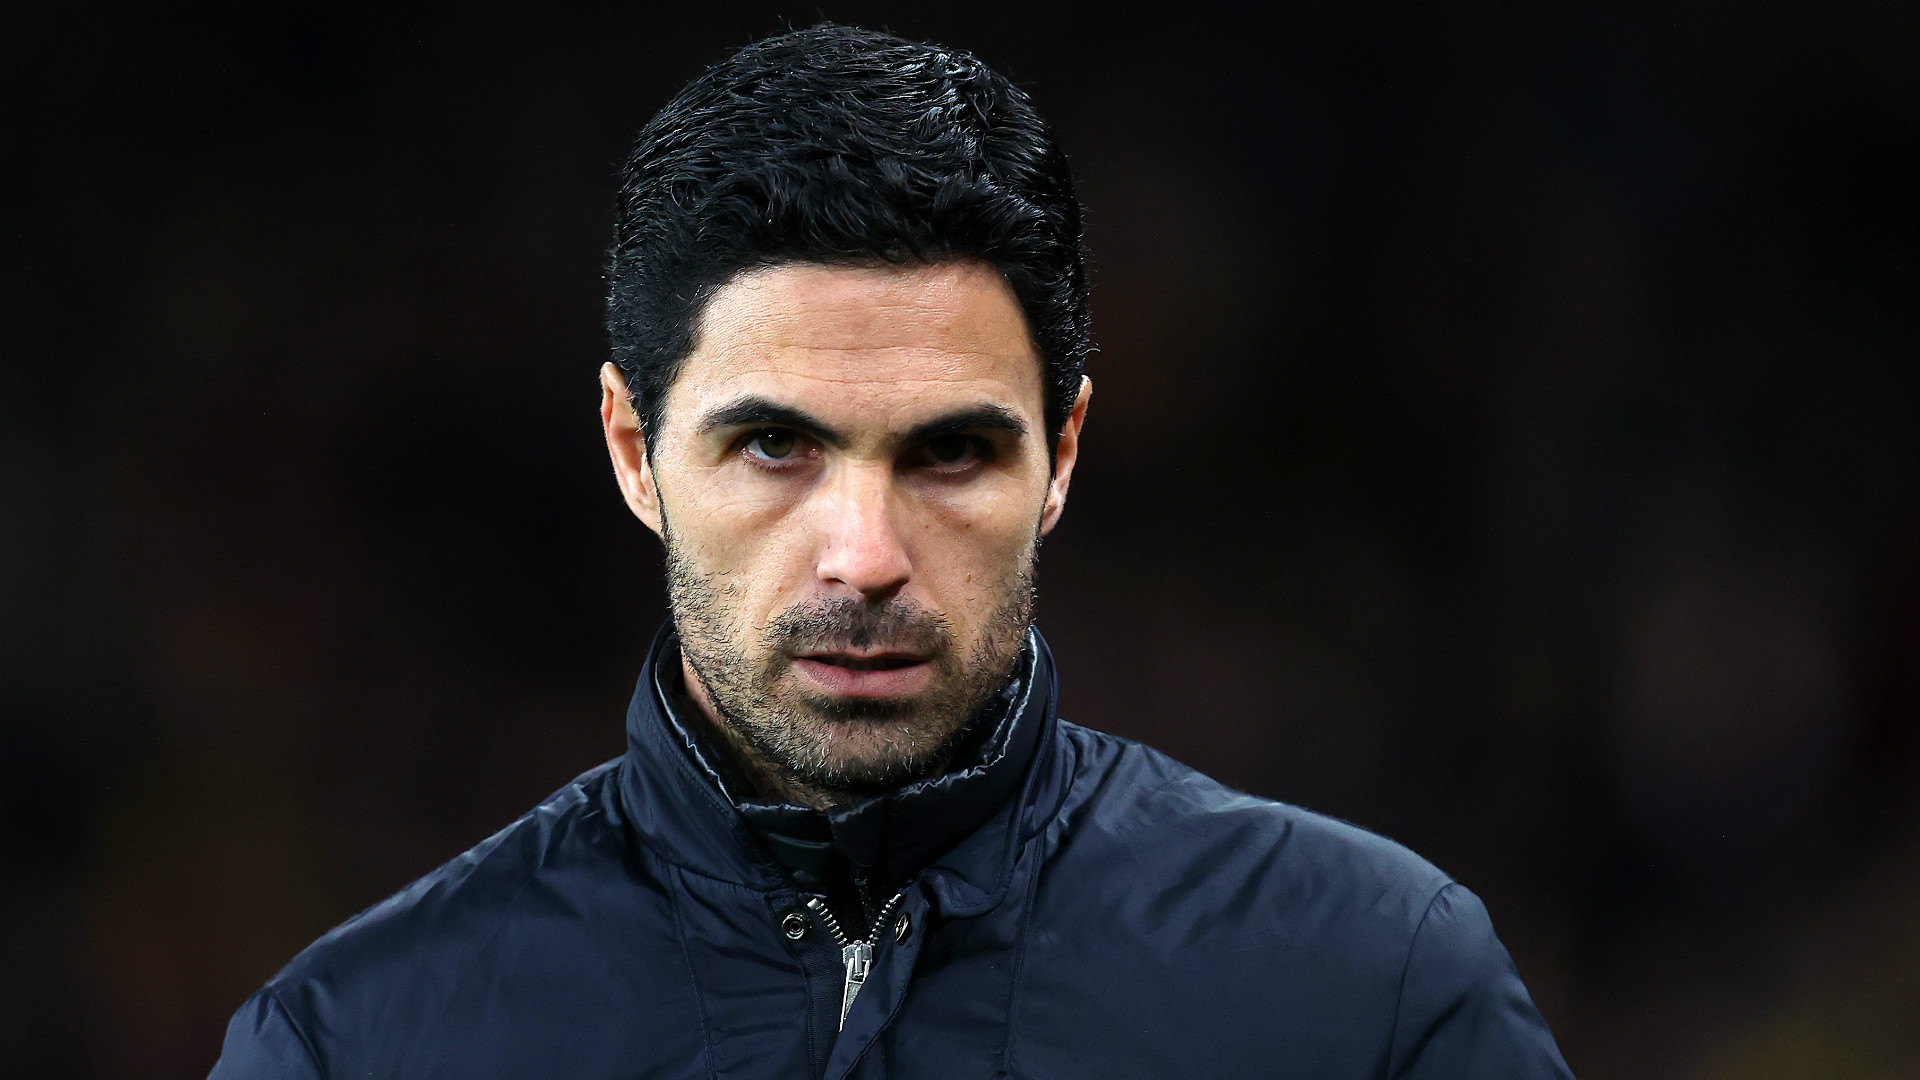 Arteta explains how Lacazette can win back his spot in Arsenal's starting XI